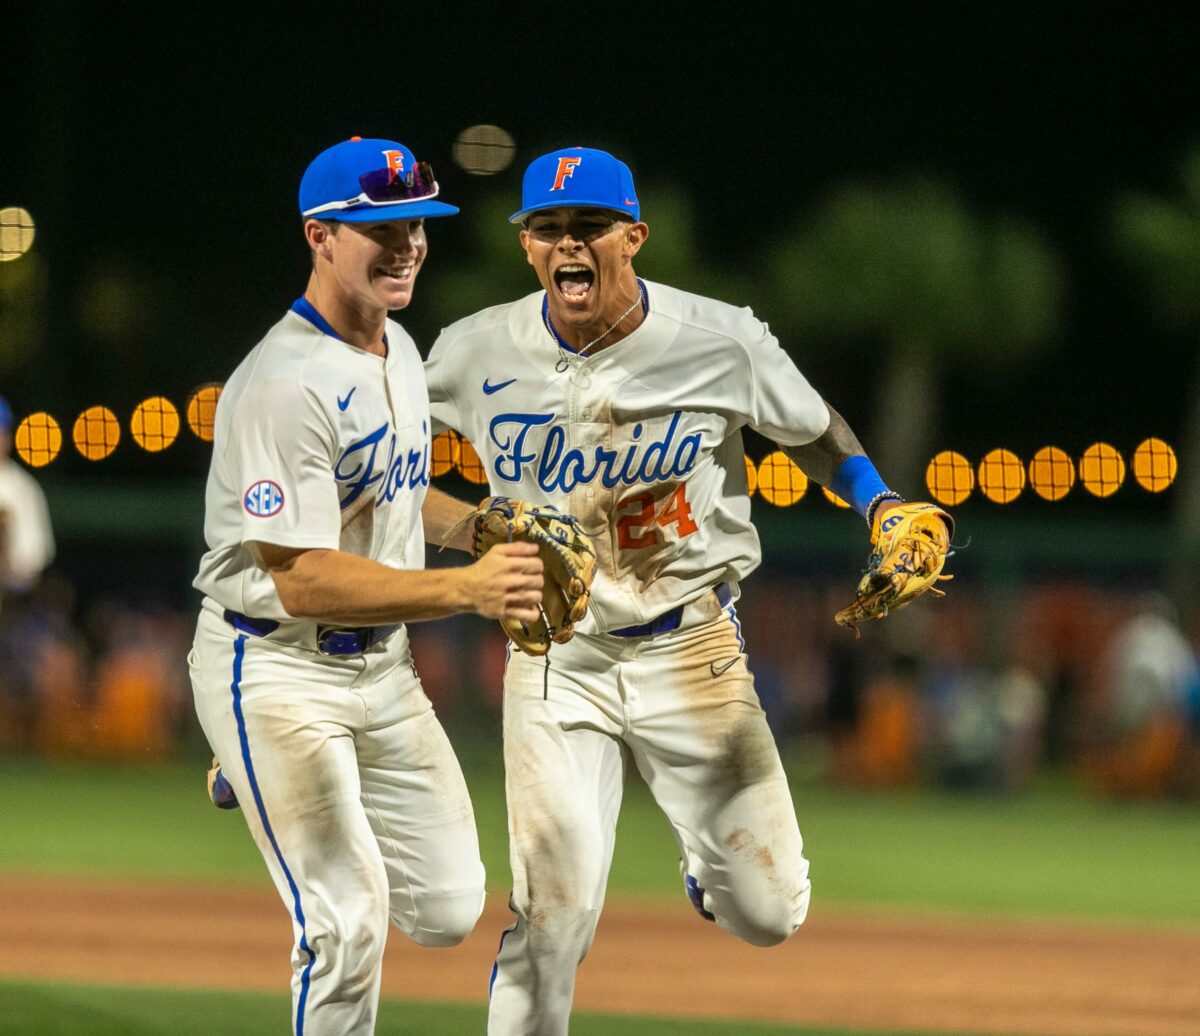 Florida completes comeback to win Mississippi St. series opener